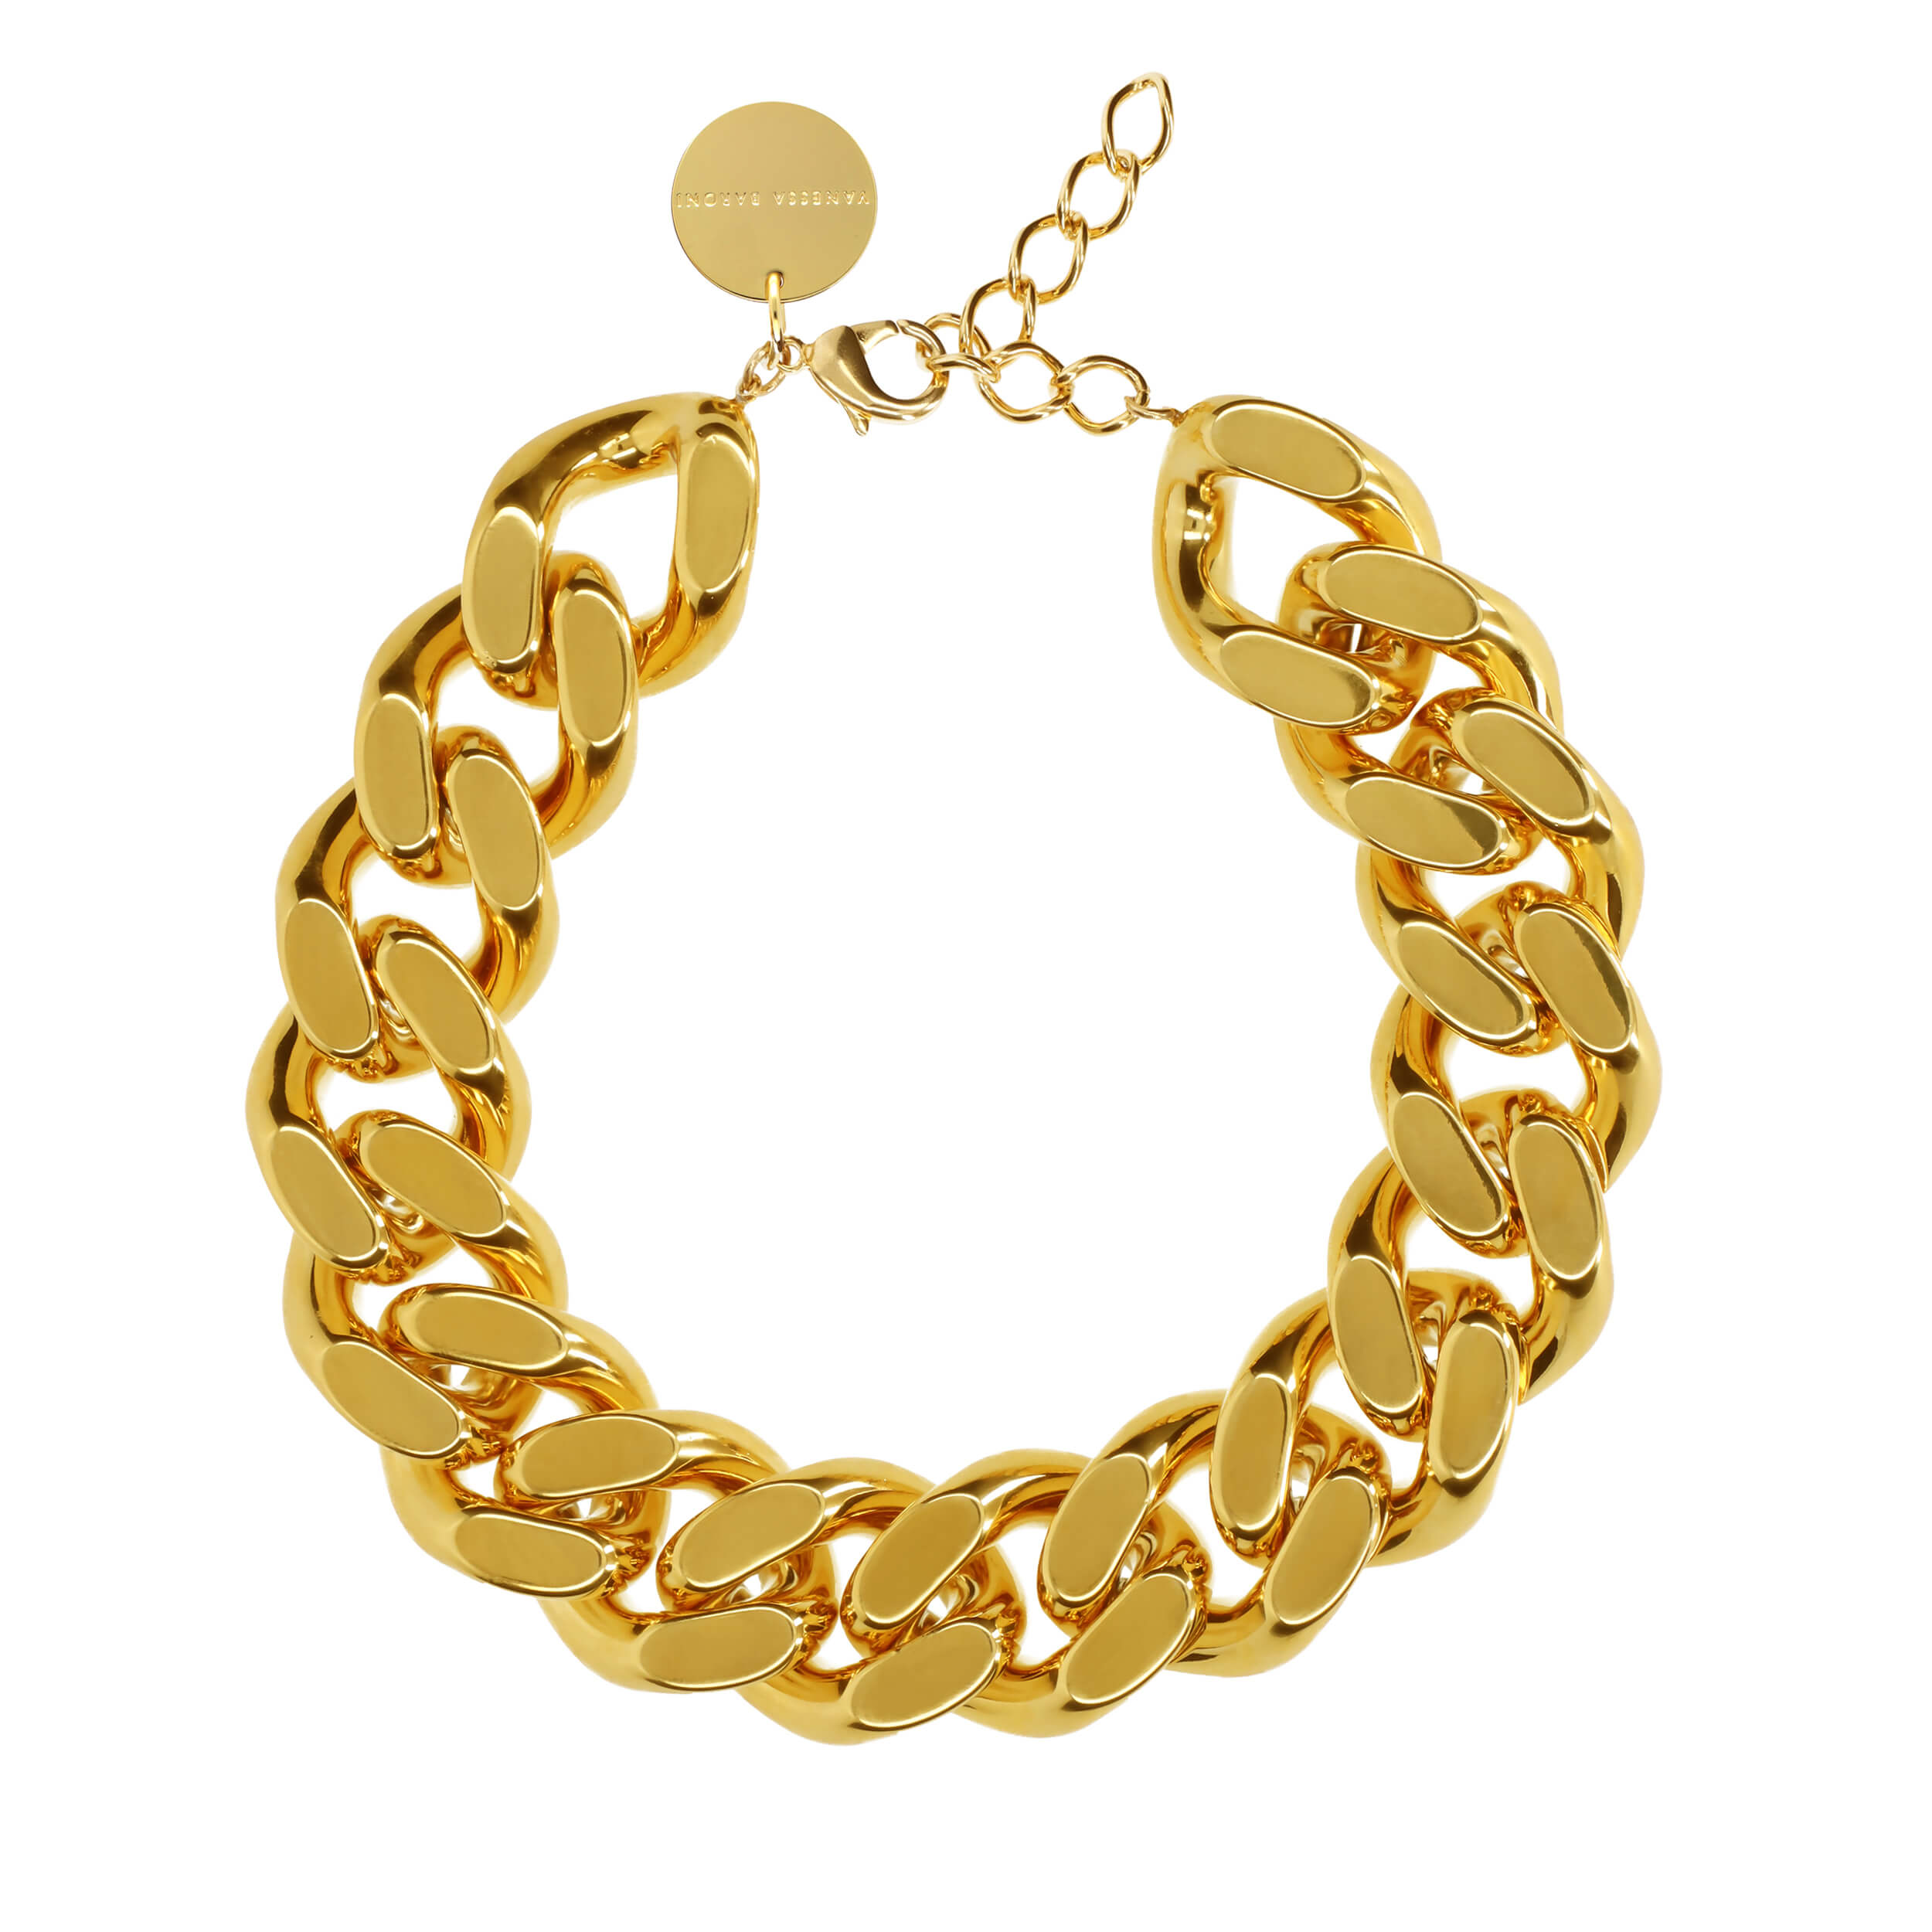 Big Heavy Gold Necklaces Gold Souk Stock Photo 1238387449 | Shutterstock